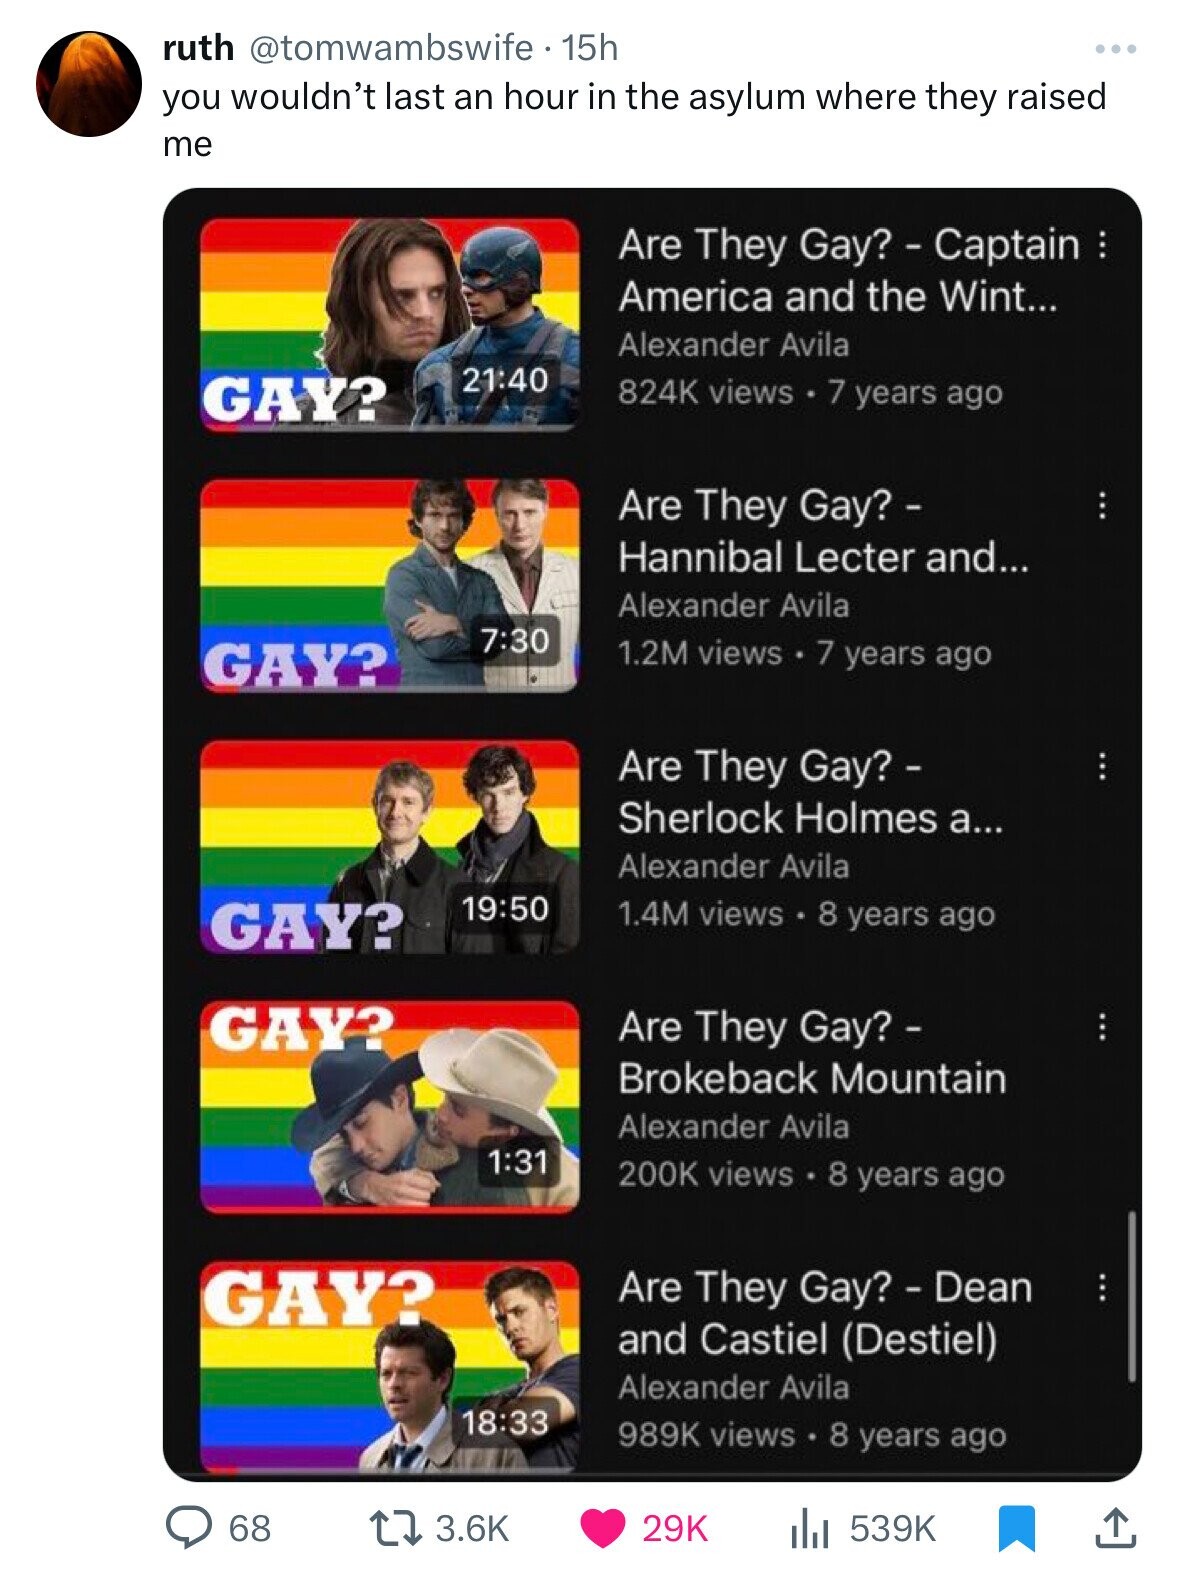 screenshot - ruth 15h you wouldn't last an hour in the asylum where they raised me Gay? Are They Gay? Captain America and the Wint... Alexander Avila views 7 years ago Are They Gay? Hannibal Lecter and... Alexander Avila Gay? 1.2M views 7 years ago Are Th